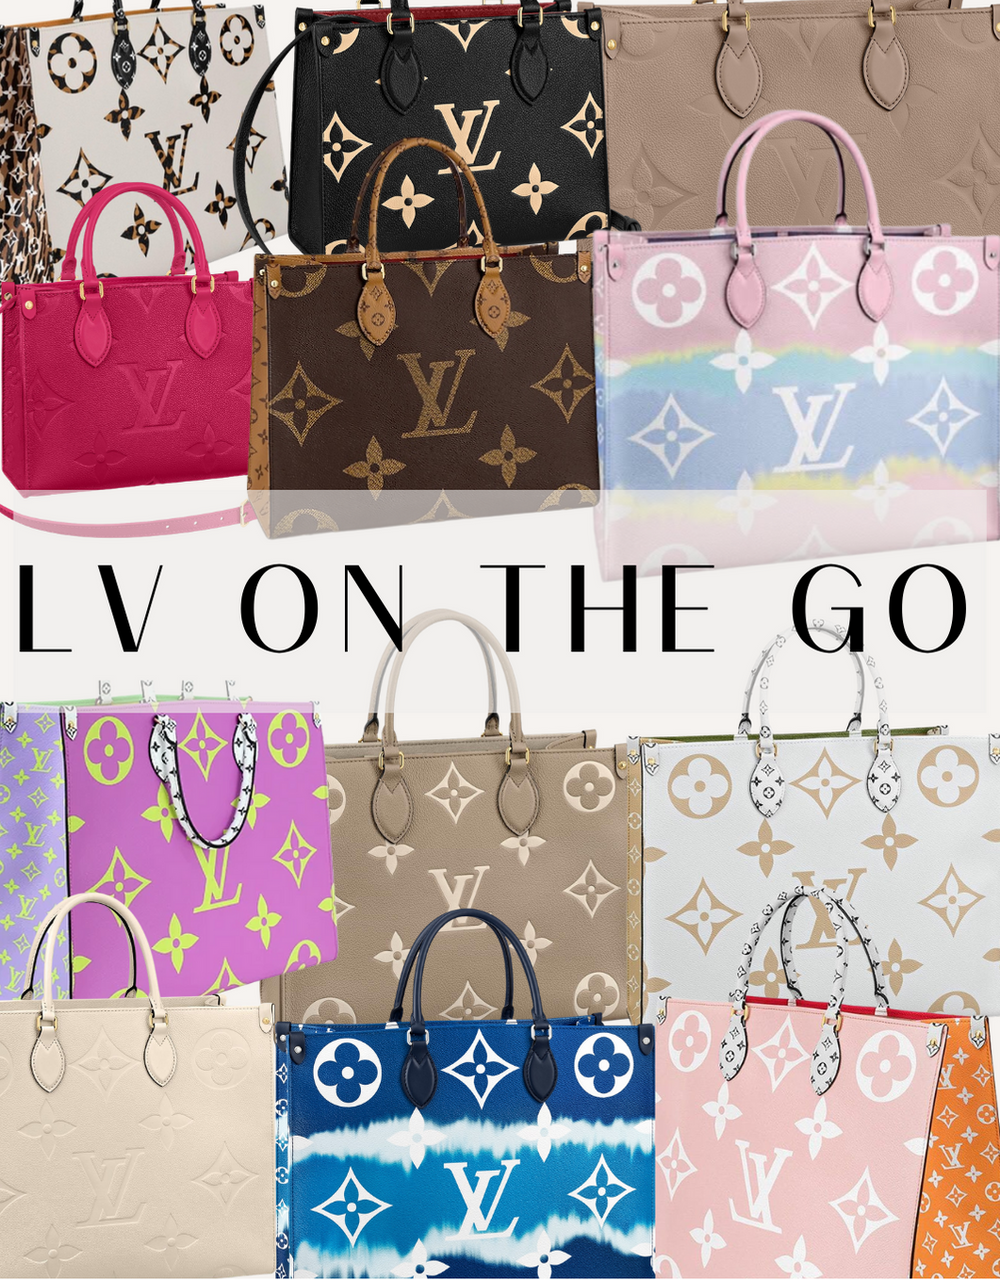 Closer Look Of Louis Vuitton Neverfull MM New Collection 2019